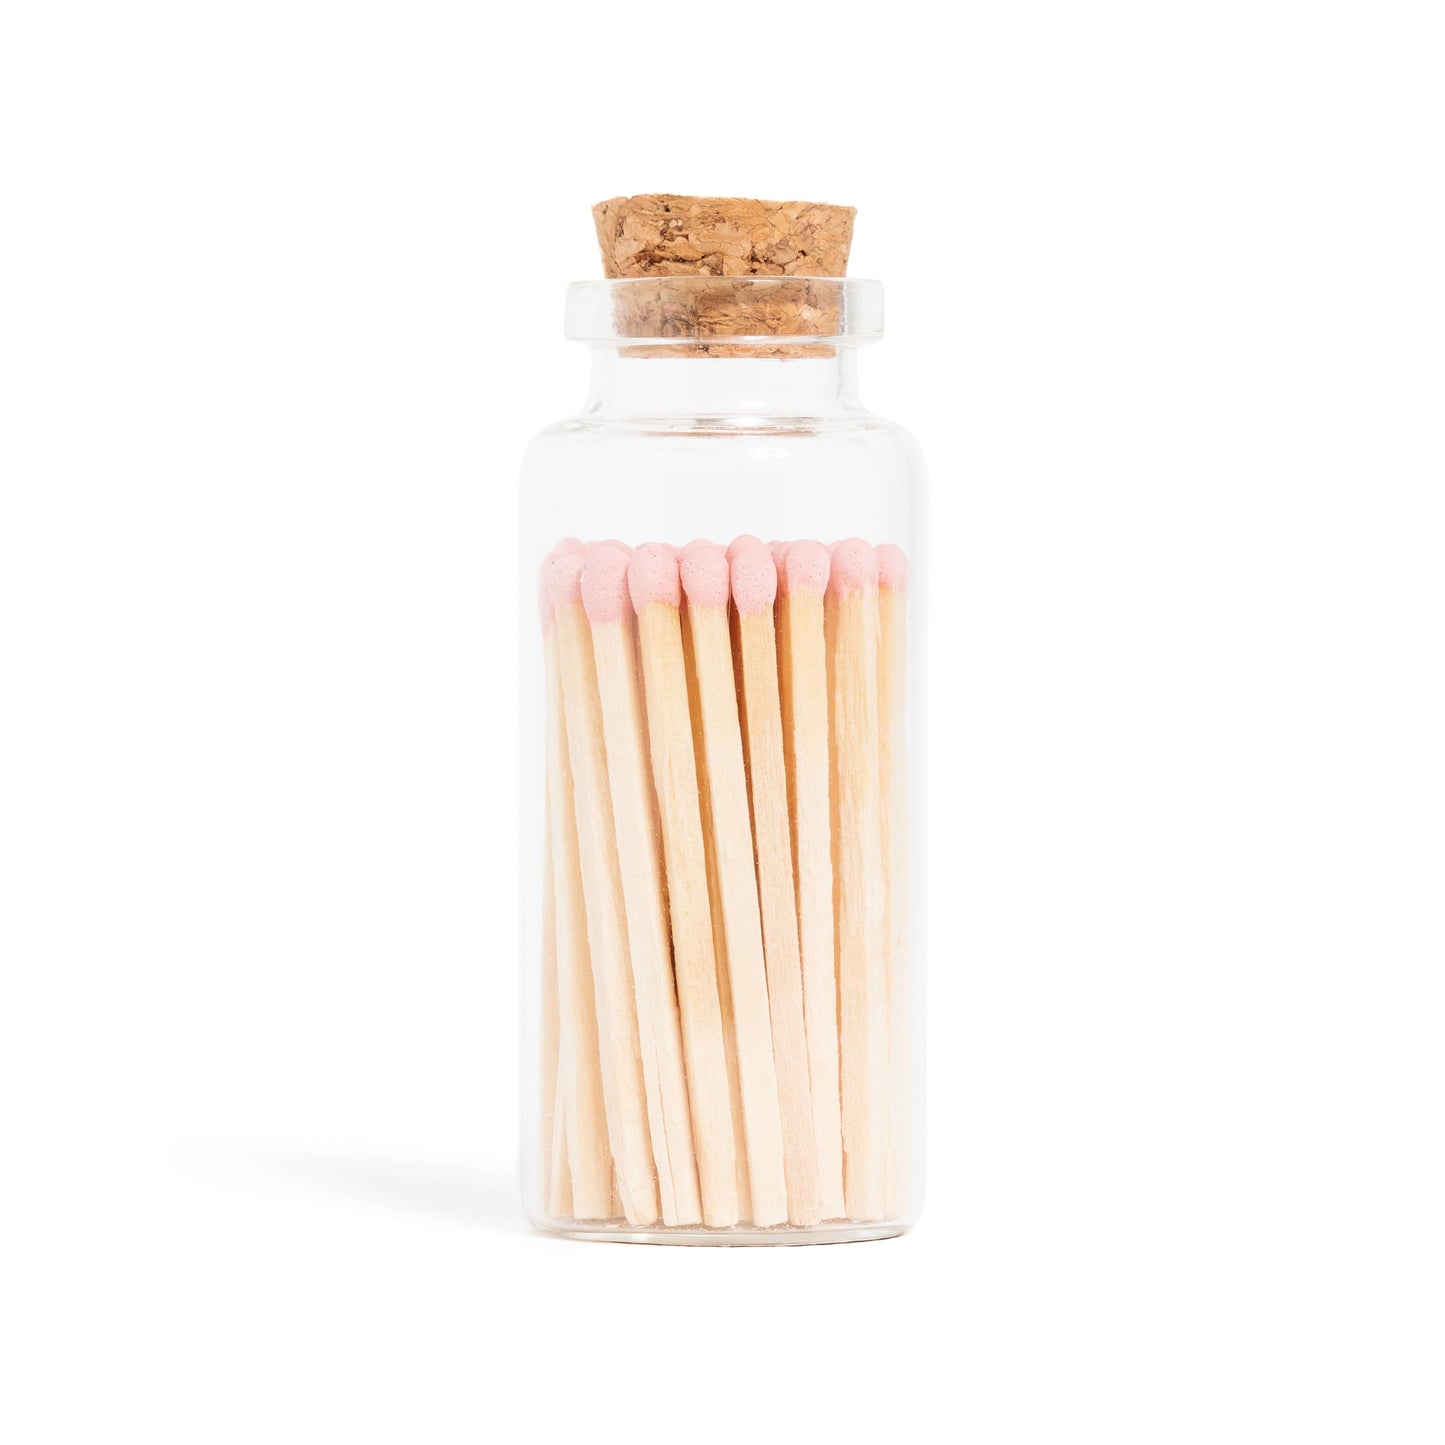 Baby Pink Matches in Medium Corked Vial